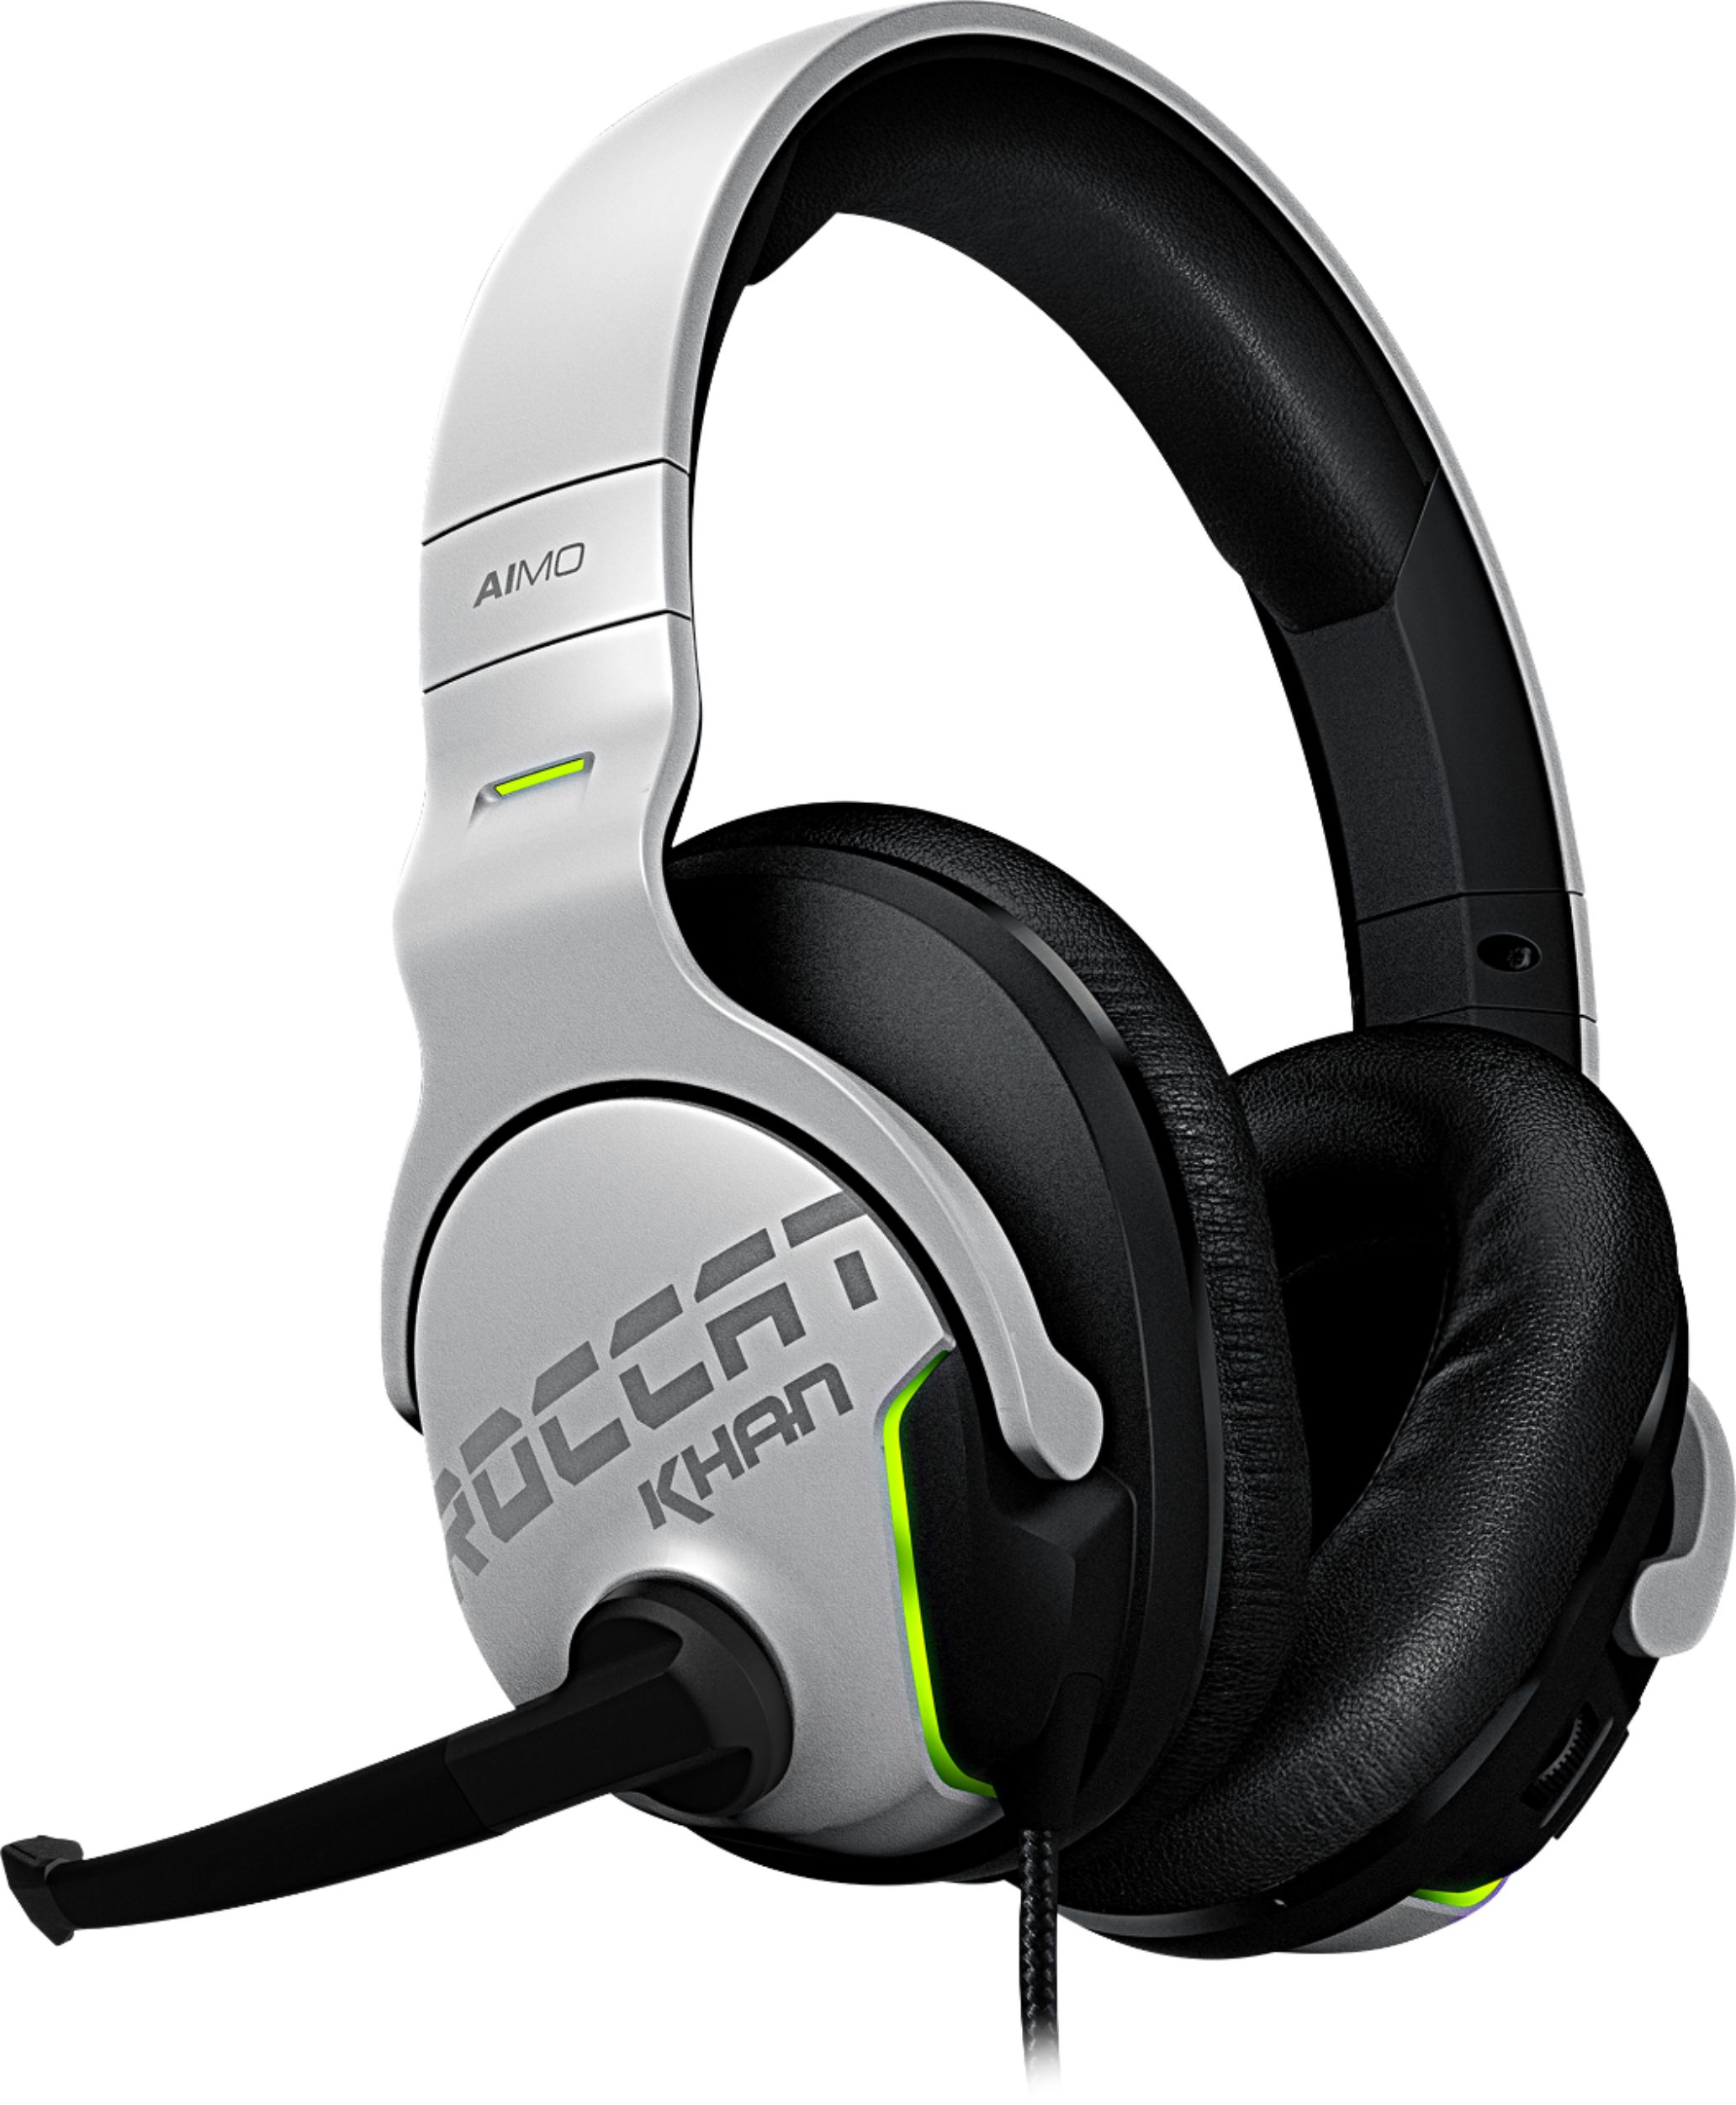 Perfect Best Gaming Headset From Best Buy for Streamer